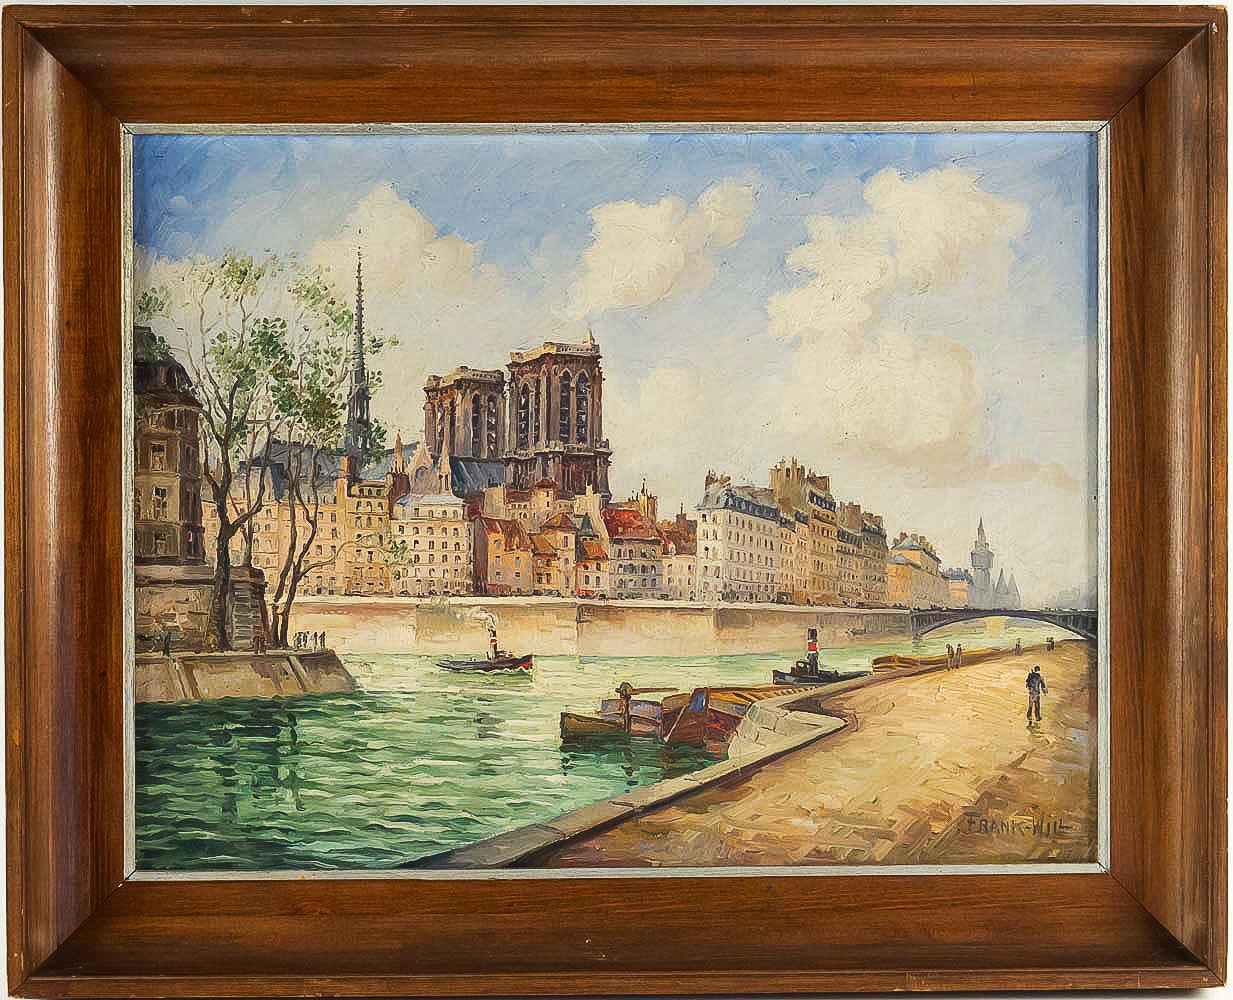 A beautiful and rare oil on canvas sign on a lower right by Frank Will, French, and American painter and watercolorist. Our painting depicts a view of Notre-Dame de Paris seen Banks of Seine, circa 1926.

Our painting is an good condition, original